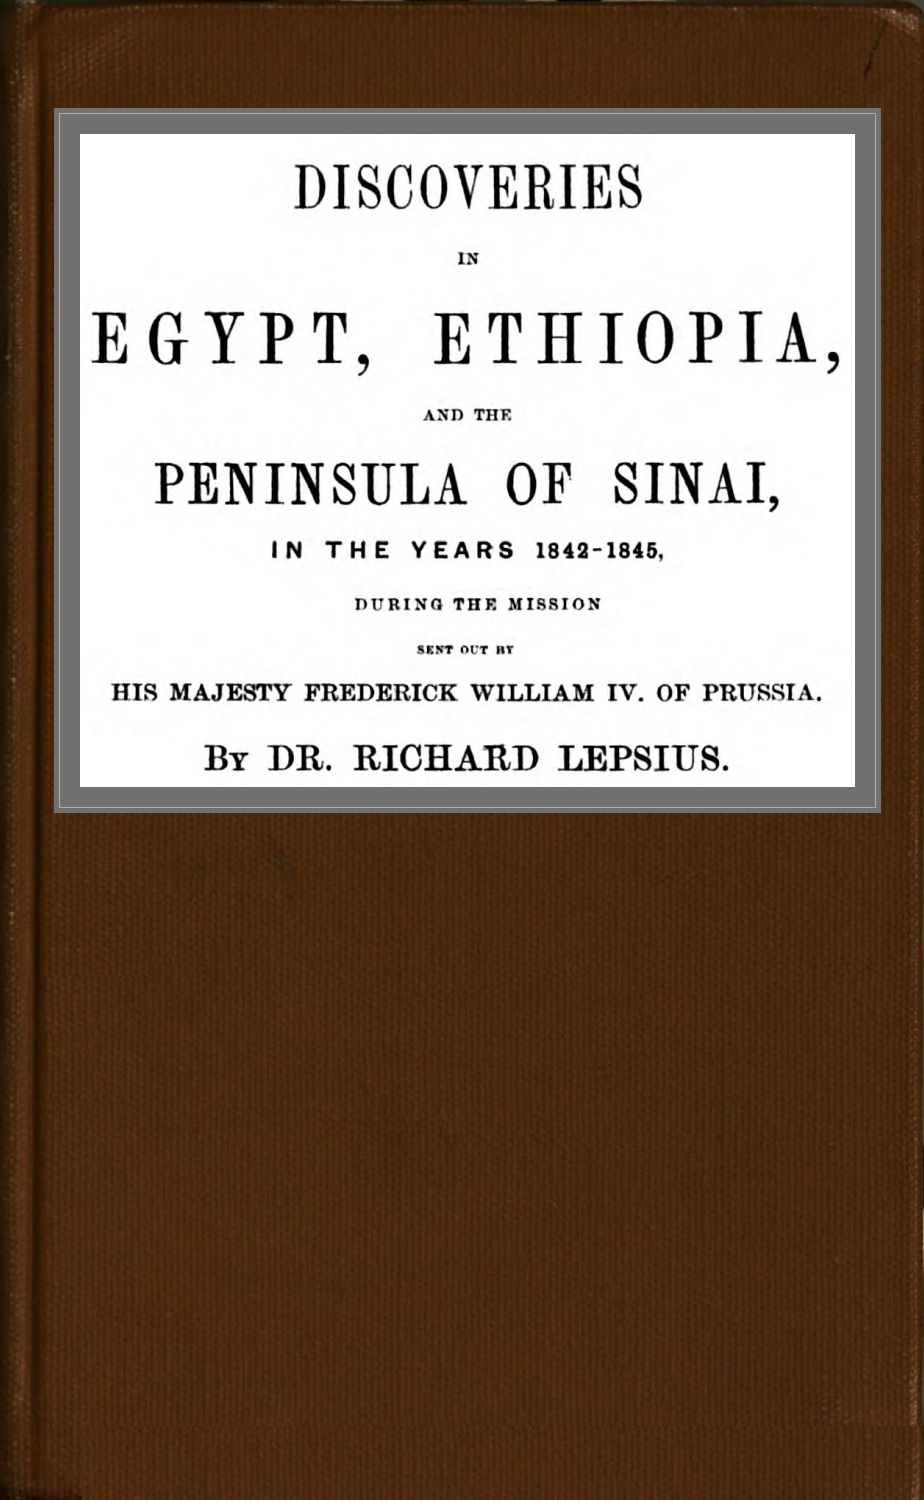 The Project Gutenberg eBook of Discoveries in Egypt, Ethiopia, and the peninsula of Sinai by Richard Lepsius. pic